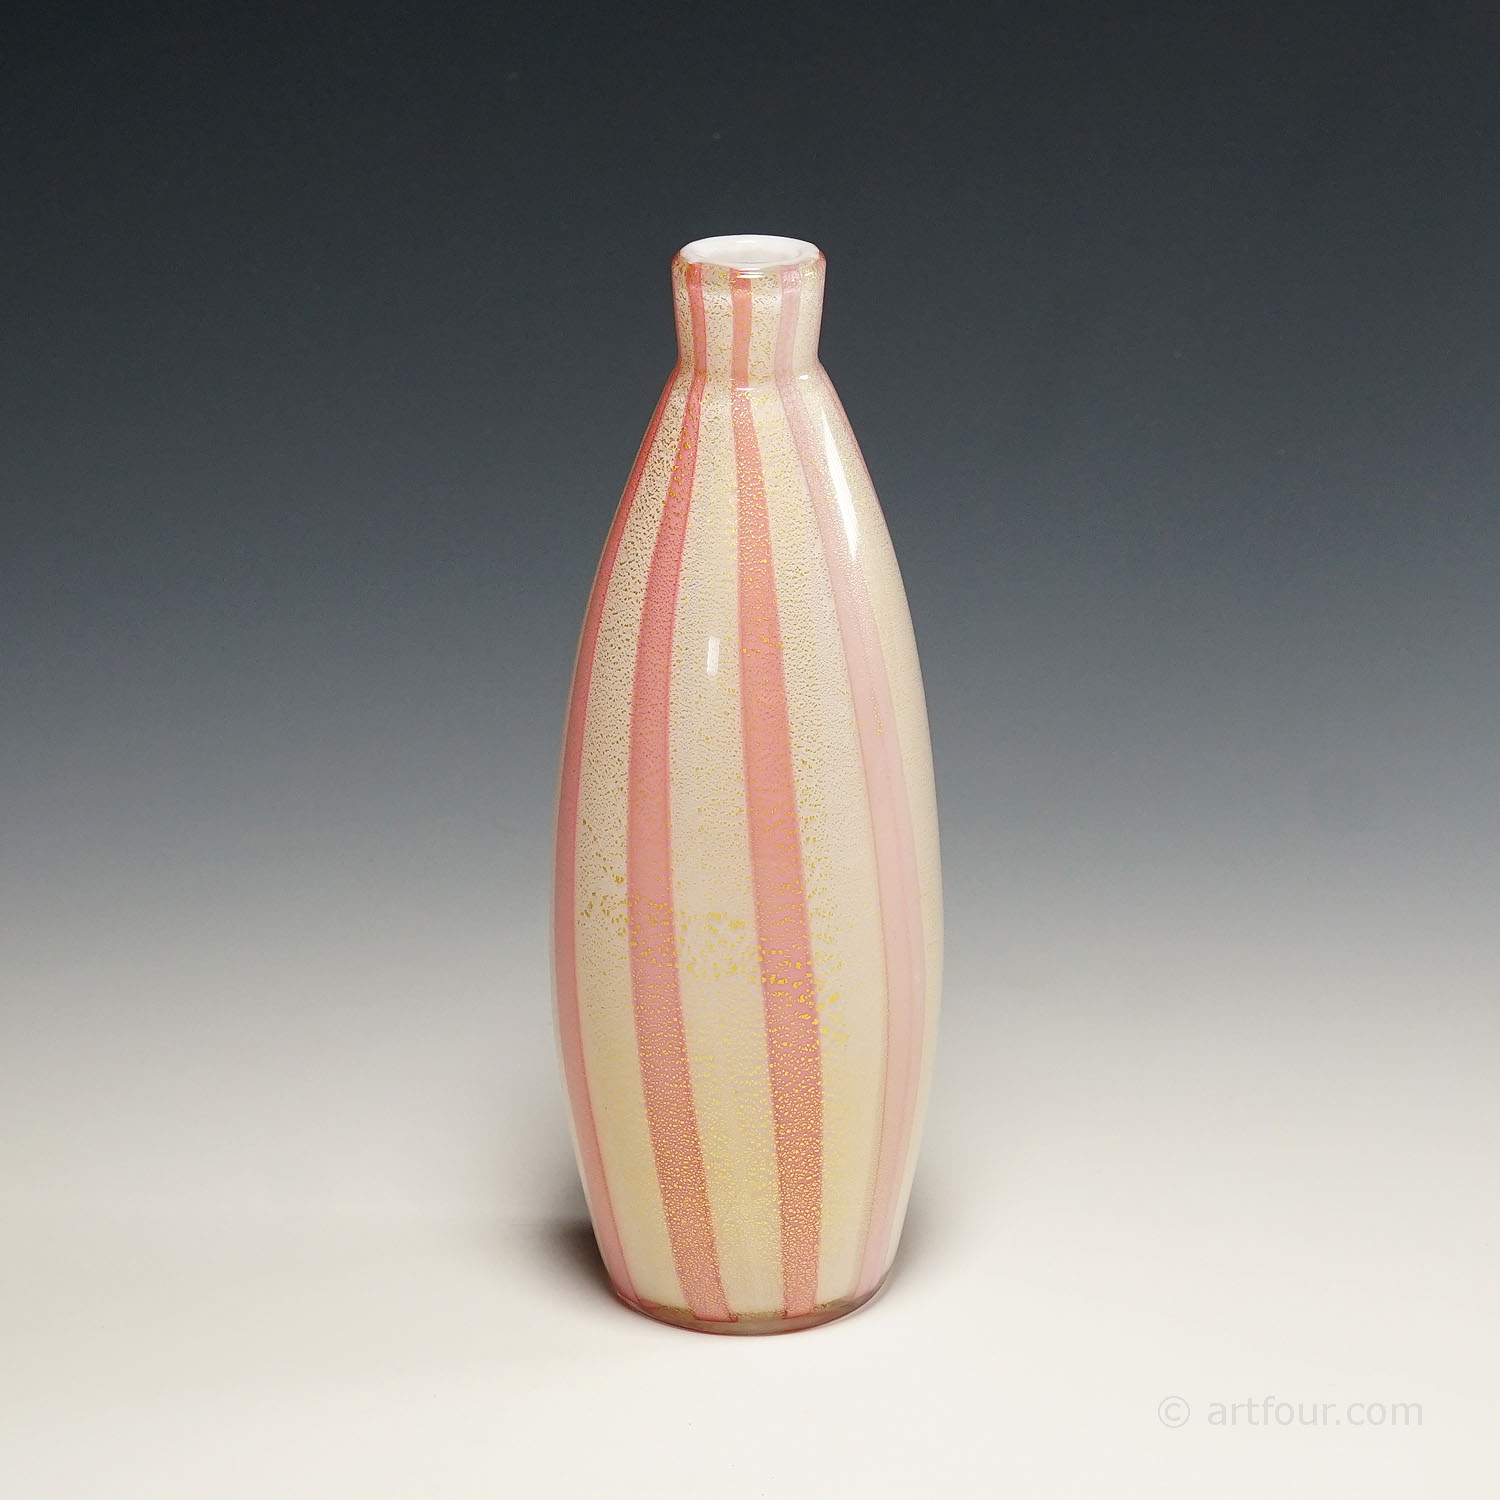 1950s Murano Art Glass Vase with Pink Stripes by Alfreo Barbini